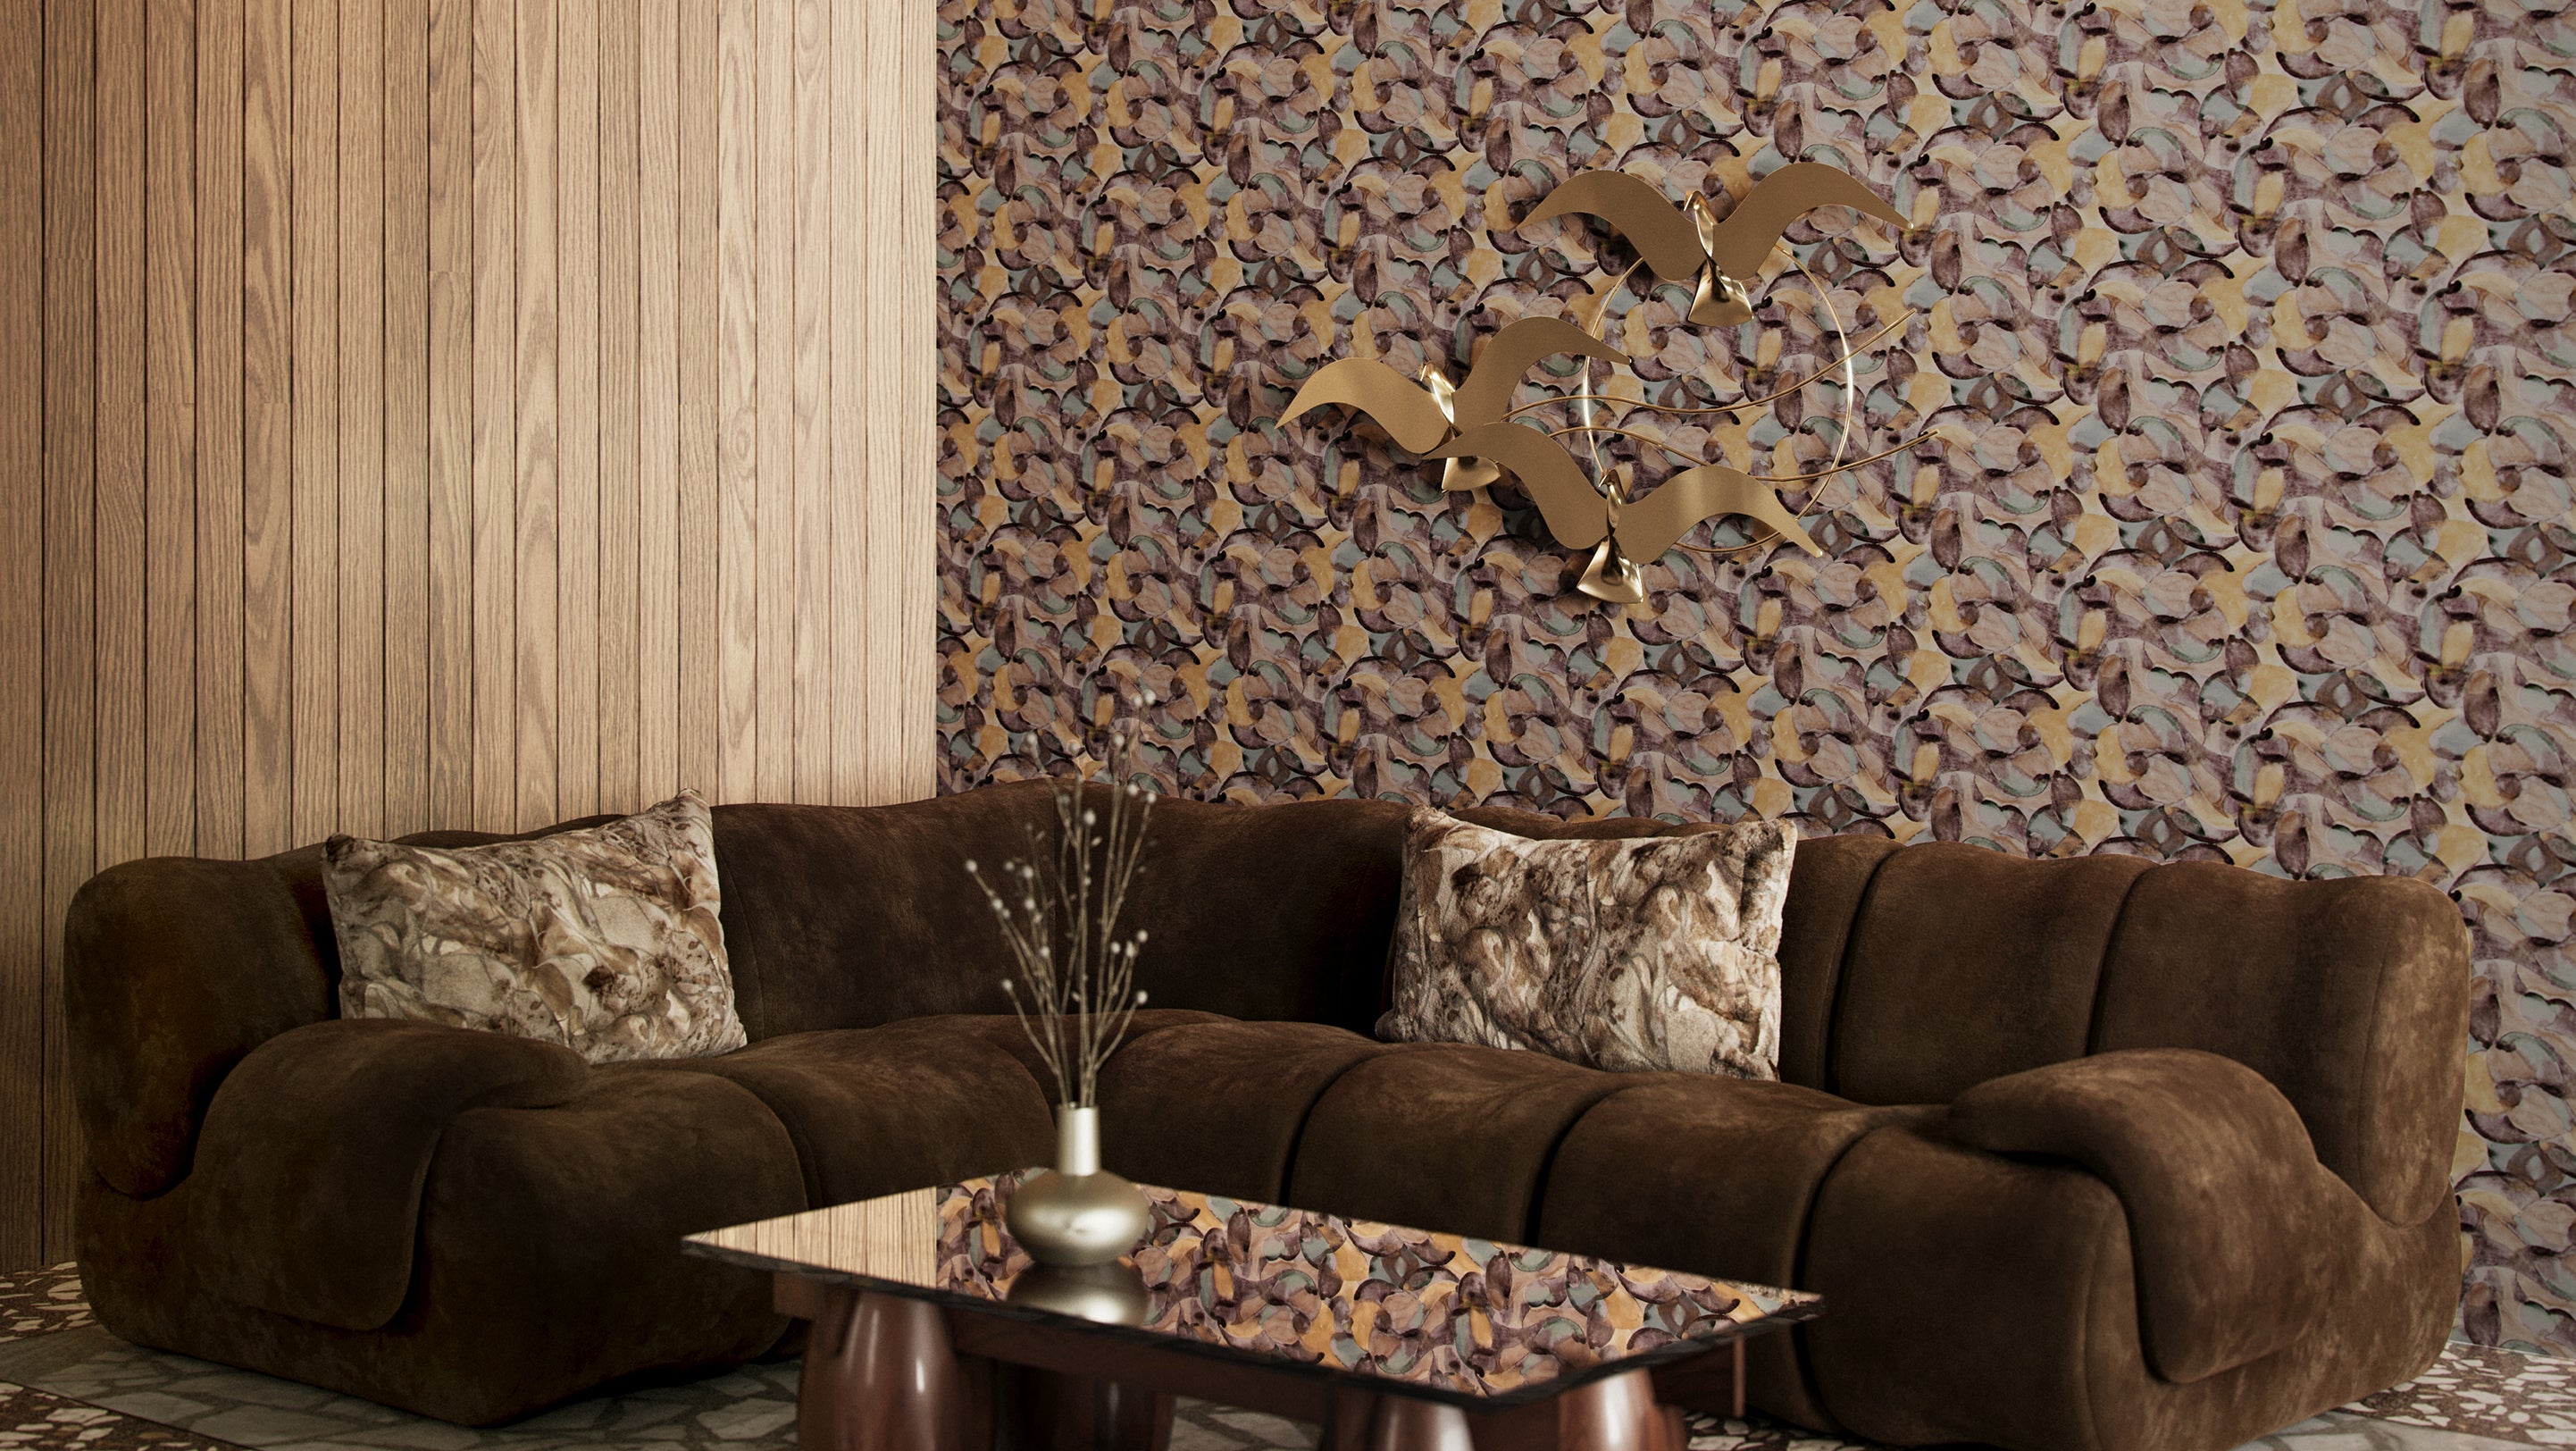 A couch, coffee table, and wall decor in a room with the orbs wallpaper in pebble.